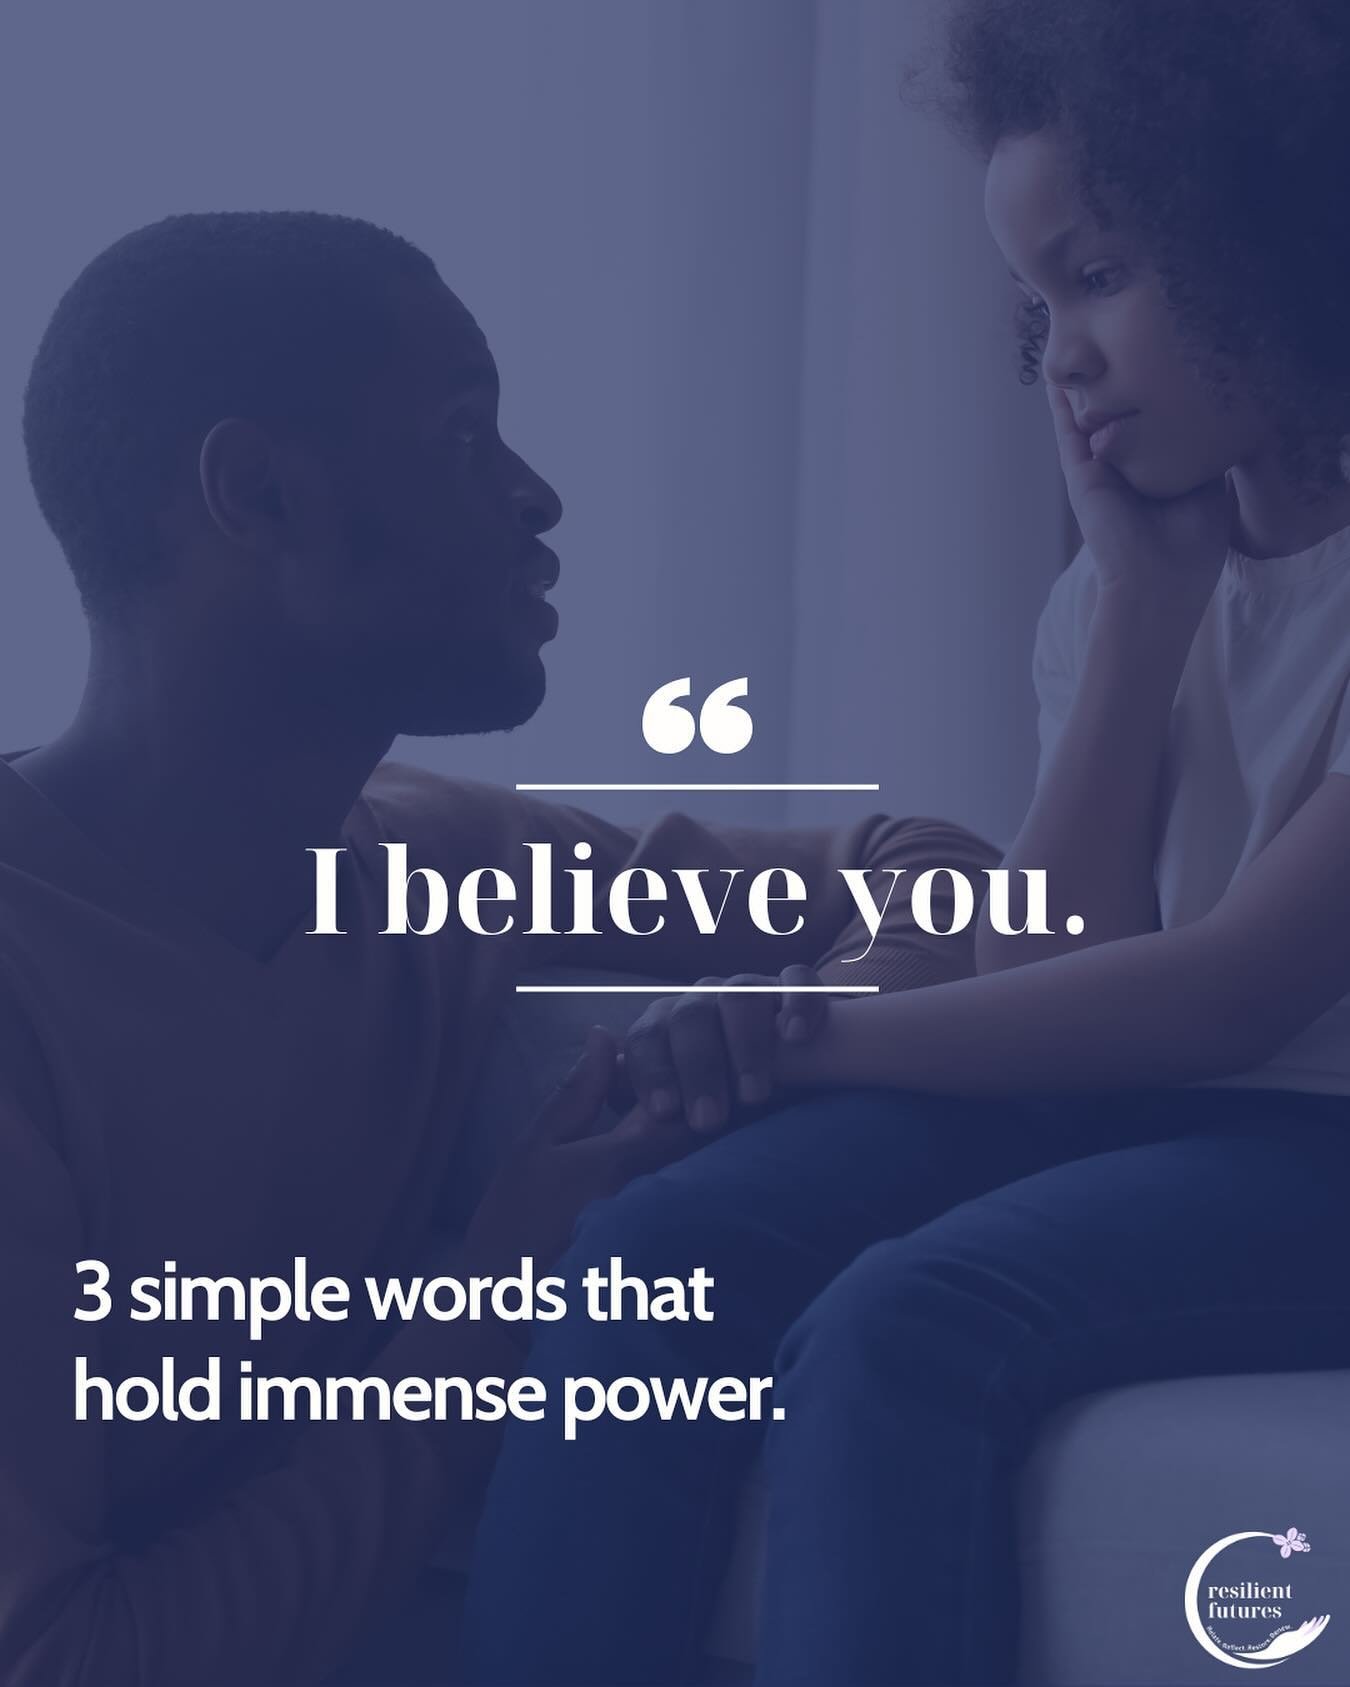 Believing is empathy in action. 🫂 💜
.
Our inclination as adults is often to dismiss, move forward, or even doubt a child&rsquo;s experience, especially if it doesn&rsquo;t align with our own view. However, taking a moment to pause and acknowledge a